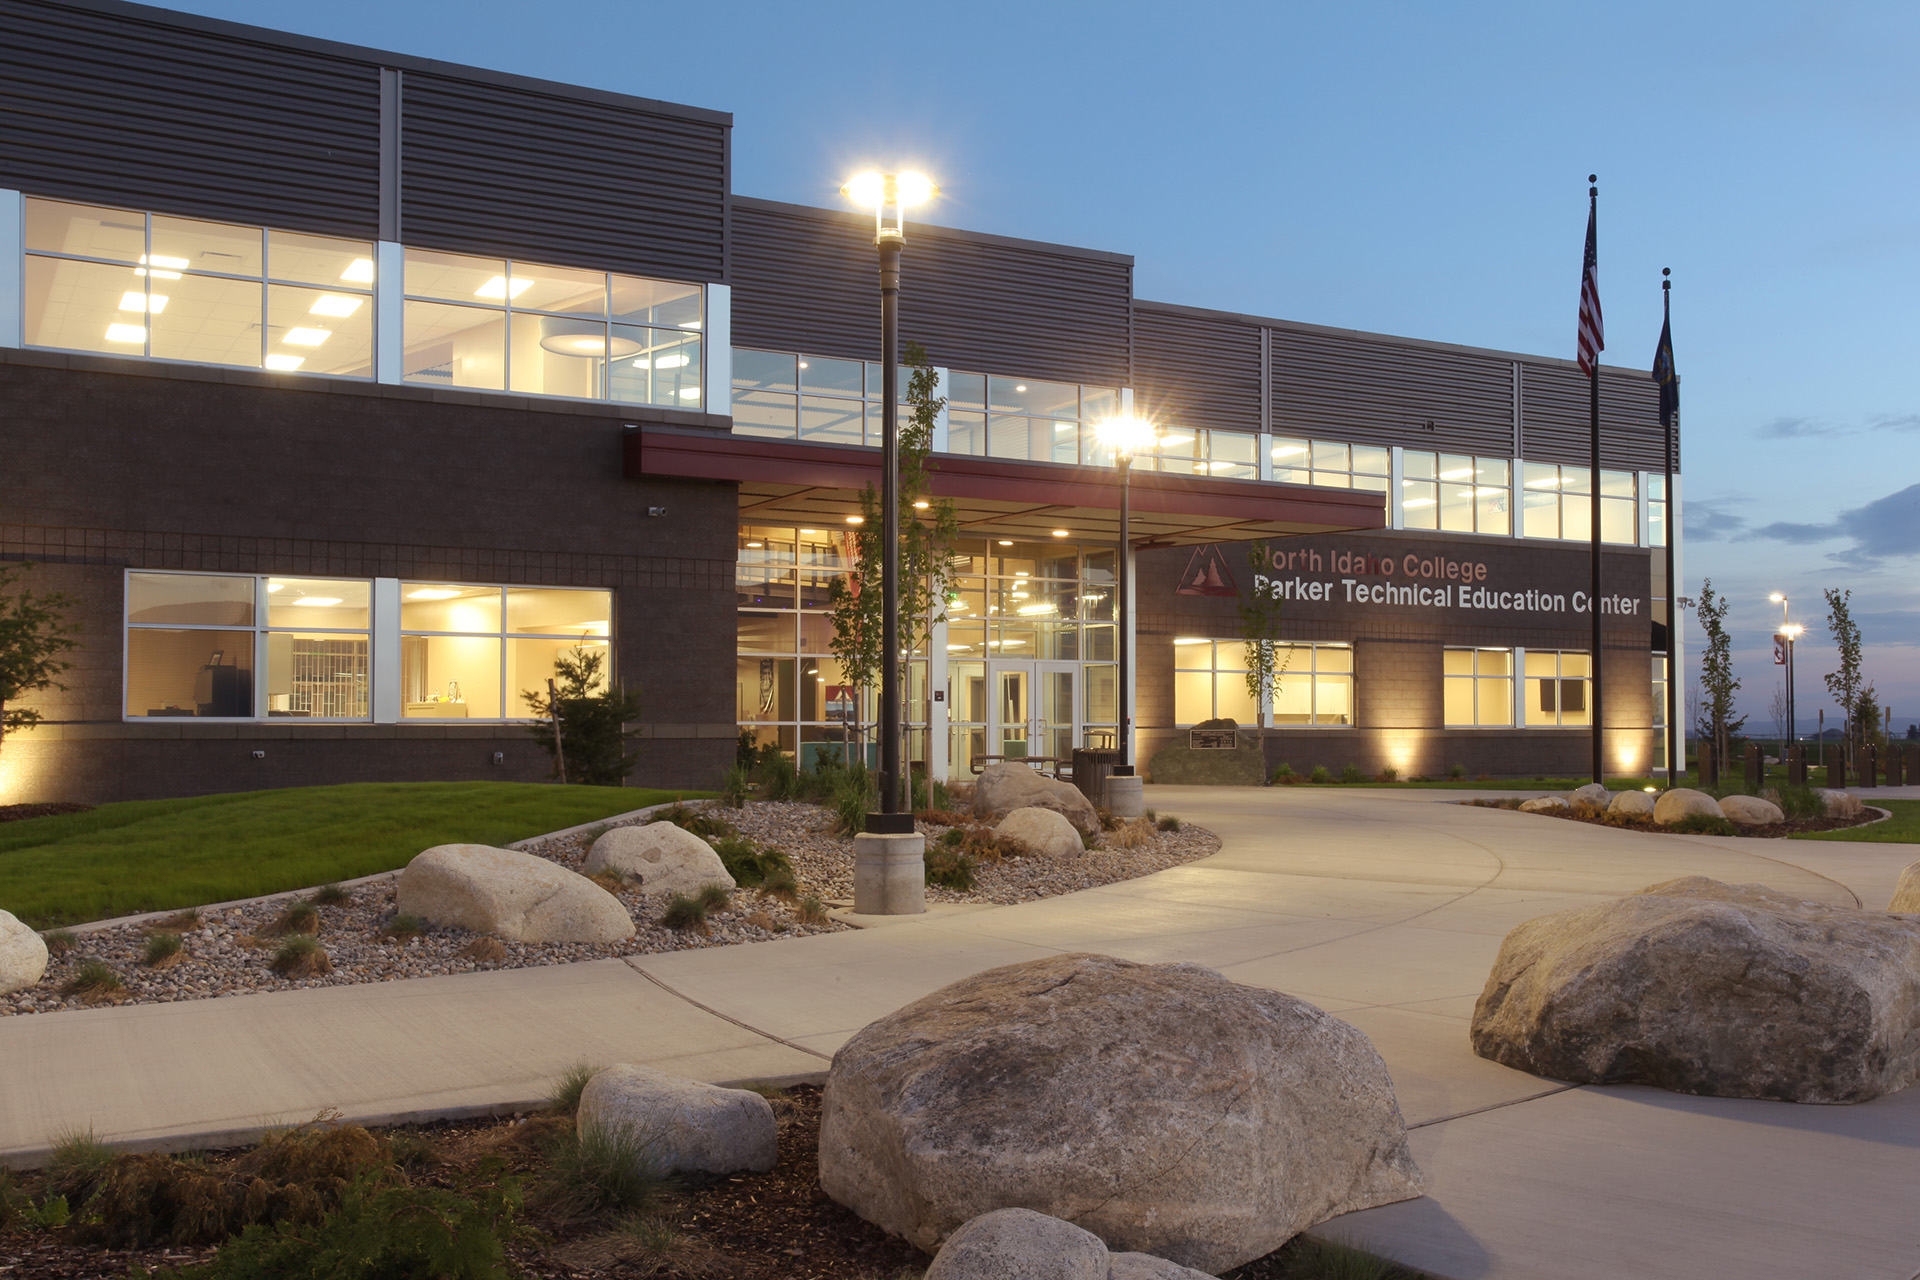 North Idaho College Parker Technical Education Center Entry